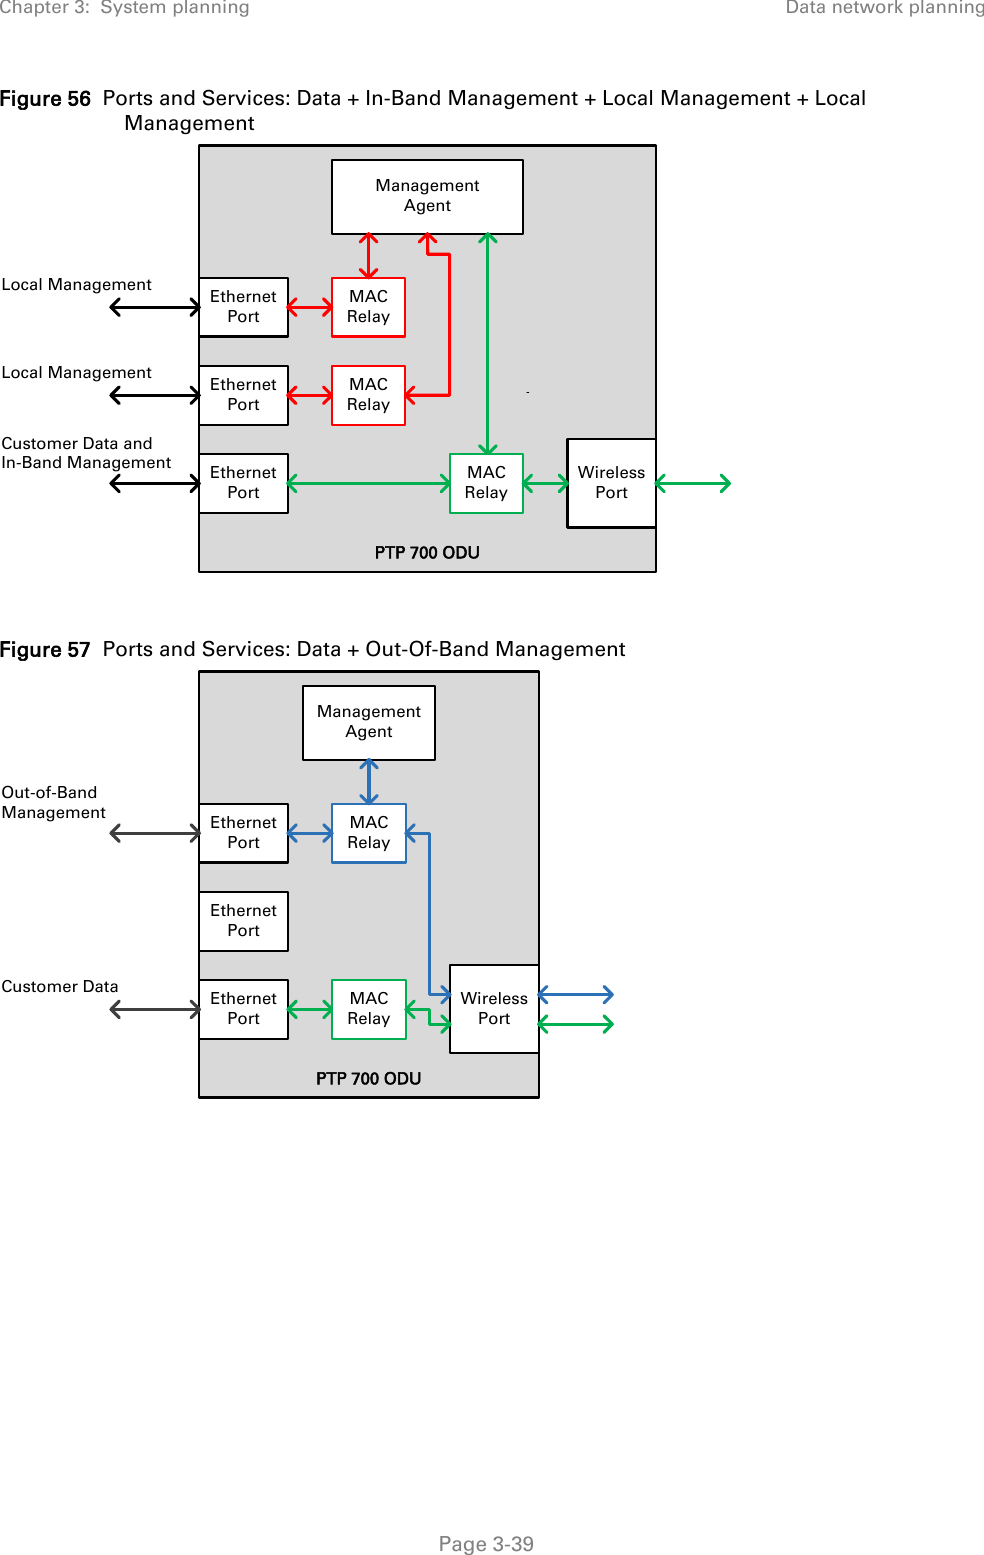 Chapter 3:  System planning Data network planning  Figure 56  Ports and Services: Data + In-Band Management + Local Management + Local Management   Figure 57  Ports and Services: Data + Out-Of-Band Management   PTP 700 ODUManagementAgentWirelessPortEthernetPortEthernetPortEthernetPortMAC RelayCustomer Data andIn-Band ManagementLocal ManagementMAC RelayLocal Management MAC RelayPTP 700 ODUManagementAgentWirelessPortEthernetPortEthernetPortEthernetPortMAC RelayCustomer DataOut-of-Band ManagementMAC Relay Page 3-39 